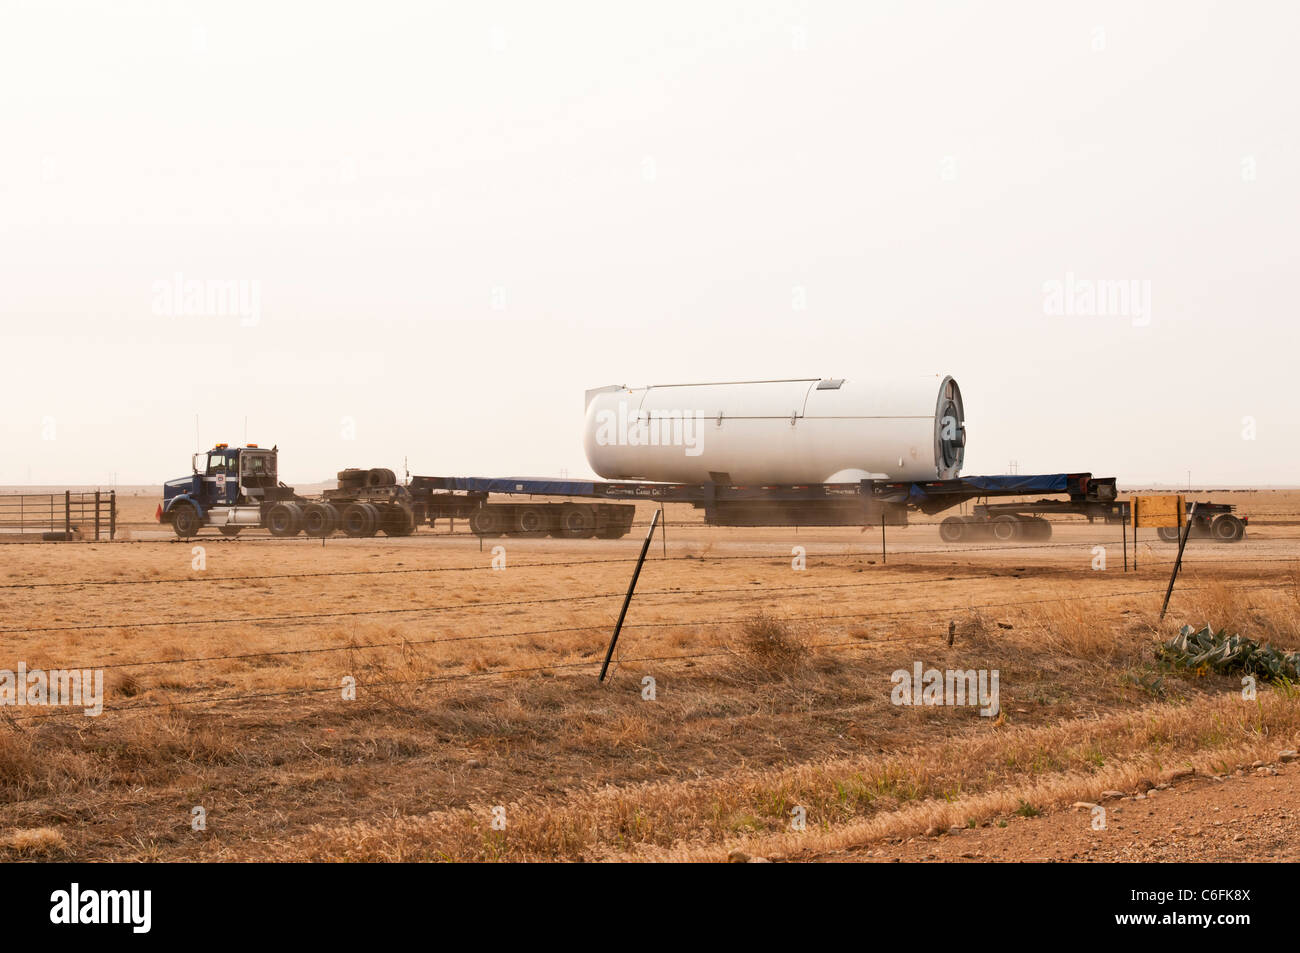 The generator hub for a horizontal-axis wind turbine is delivered to a construction site near Amarillo, Texas. Stock Photo